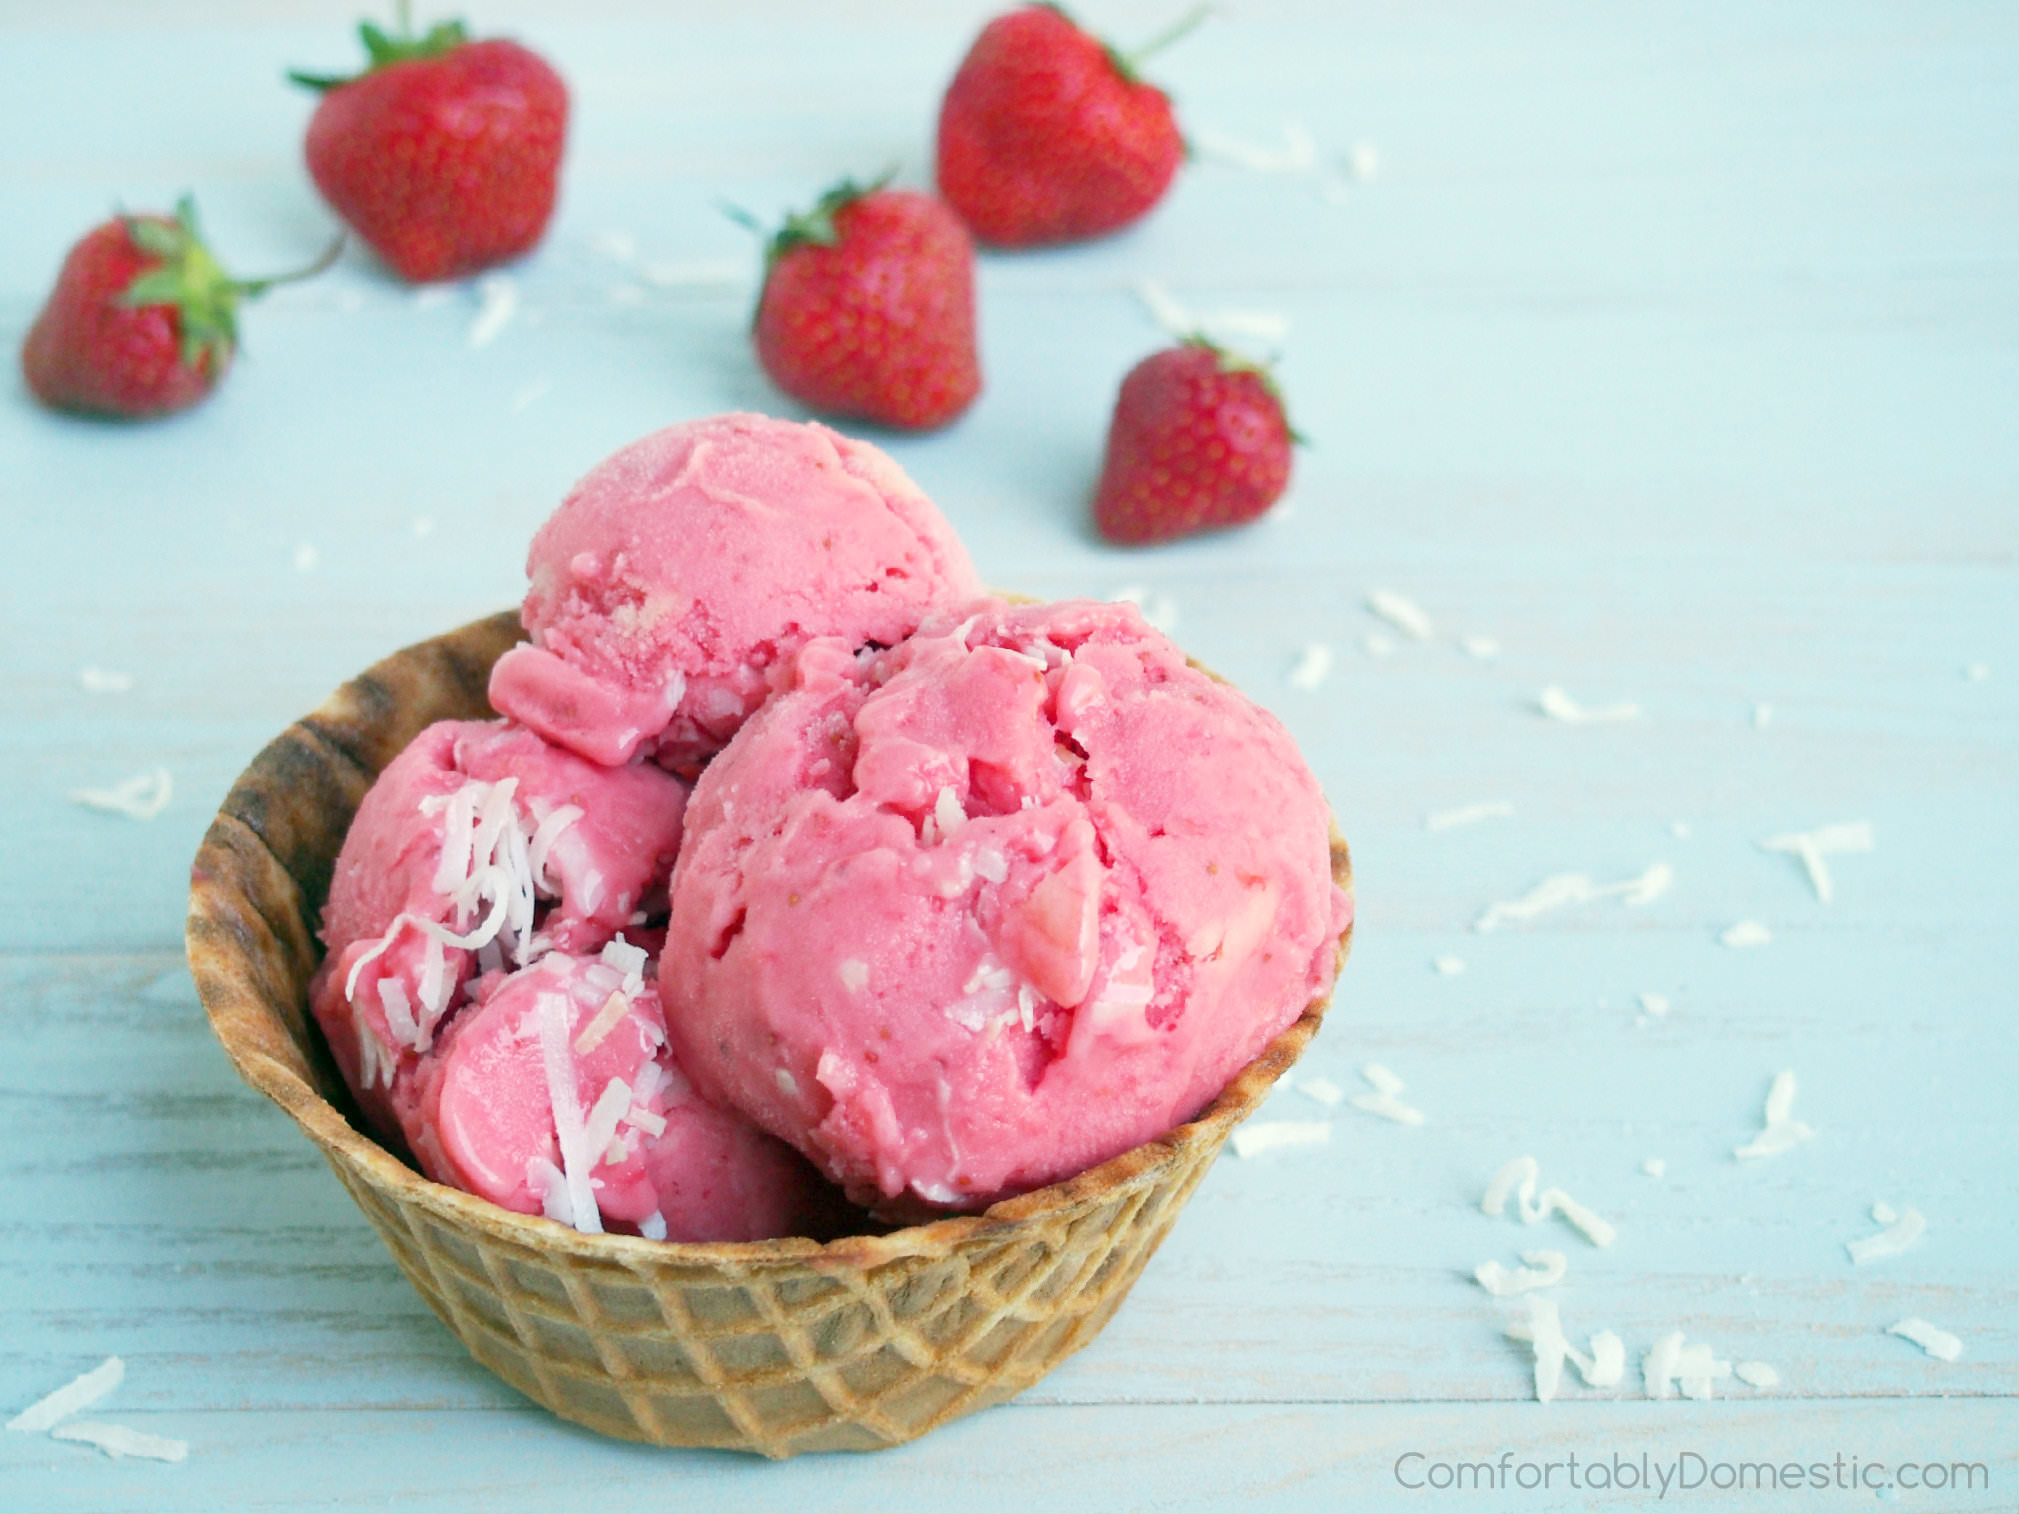 Strawberry colada frozen yogurt is a refreshing treat on a warm summer day. Ripe, juicy strawberries mingle with tangy pineapple and sweet coconut for a dreamy, creamy homemade frozen dessert. | ComfortablyDomestic.com